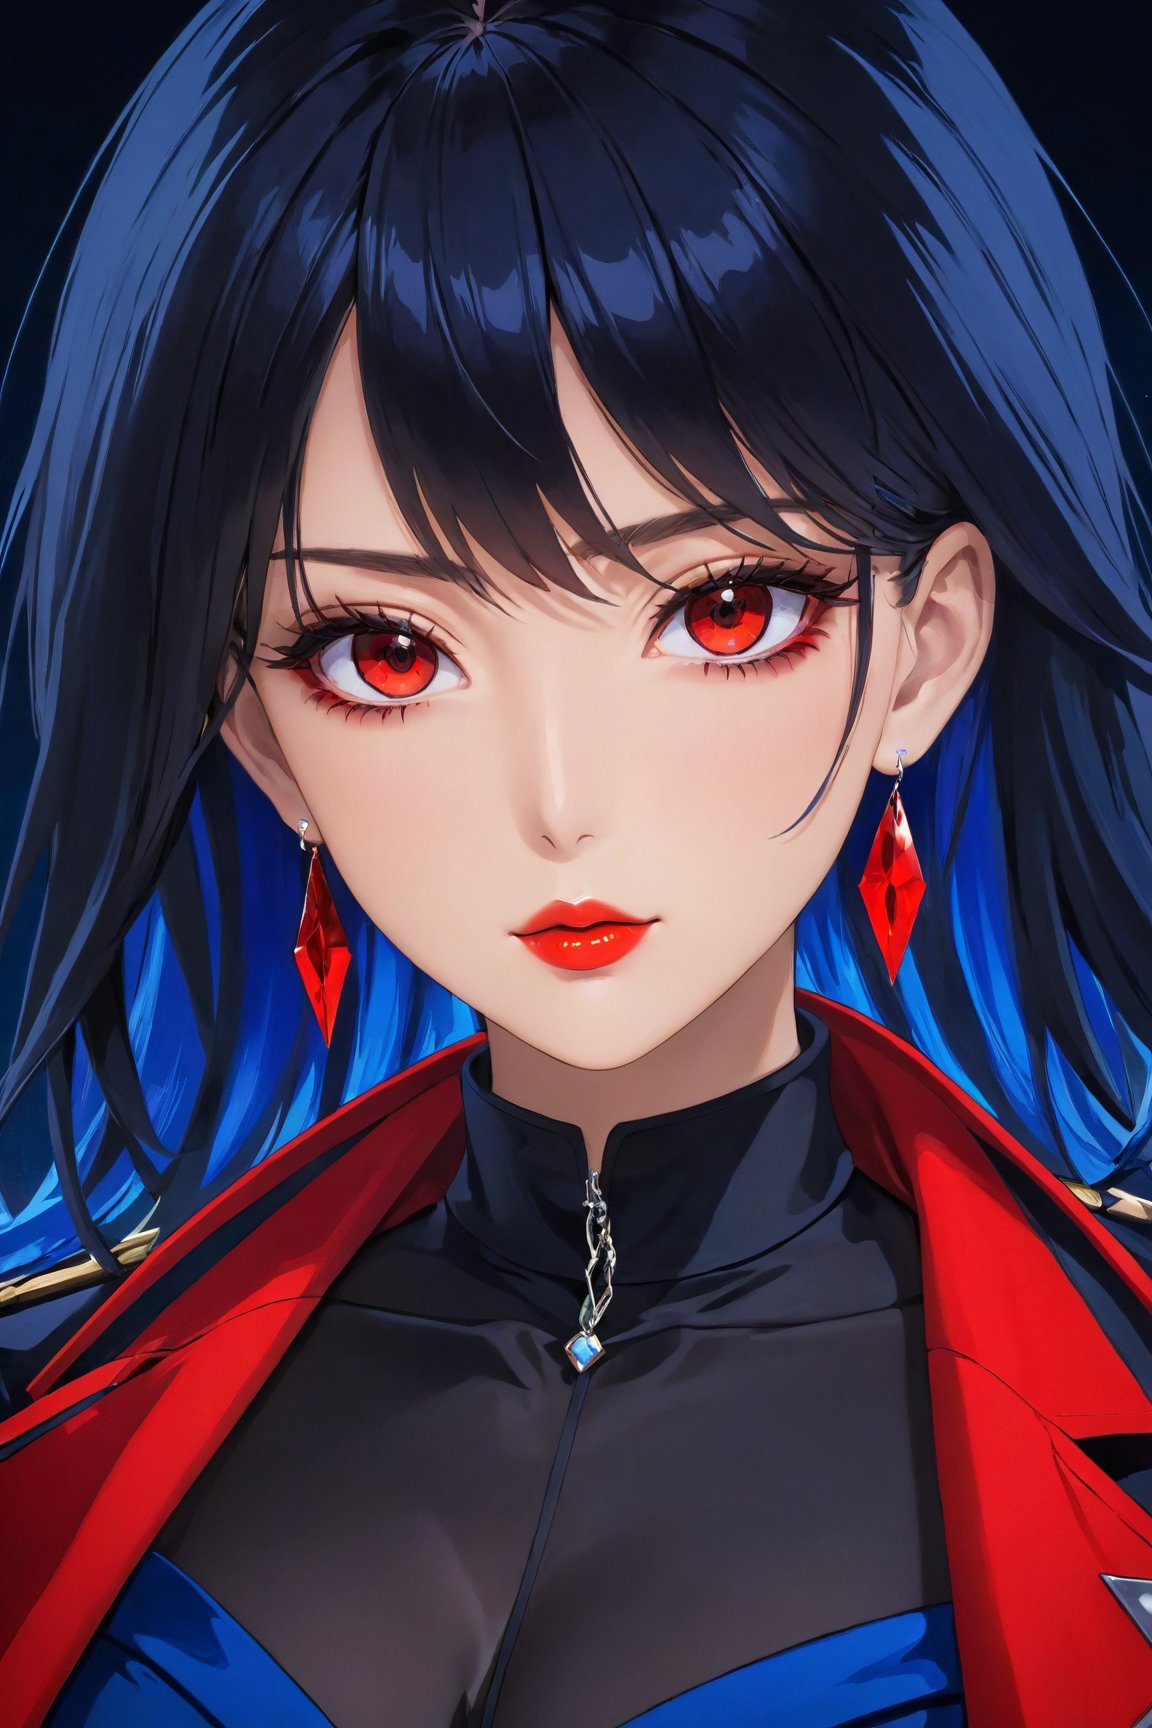 (best quality,highres),detailed eyes and face,red-eyed anime character,black-haired,beautiful detailed eyes,beautiful detailed lips,blue hourglass tip earrings,(long,long,long) blue hourglass tip earrings,red and black tone clothes,stylish and fashionable outfit,emphasis on cool and edgy,(vibrant,vivid,bold) colors,colorful fabric,clean and sharp lines,anime-style rendering,realistic shading,popular anime style,dynamic pose,focused gaze,strong and confident expression,background with futuristic elements,(dark,dramatic) lighting,cool blue and fiery red color scheme,impressive and eye-catching art style